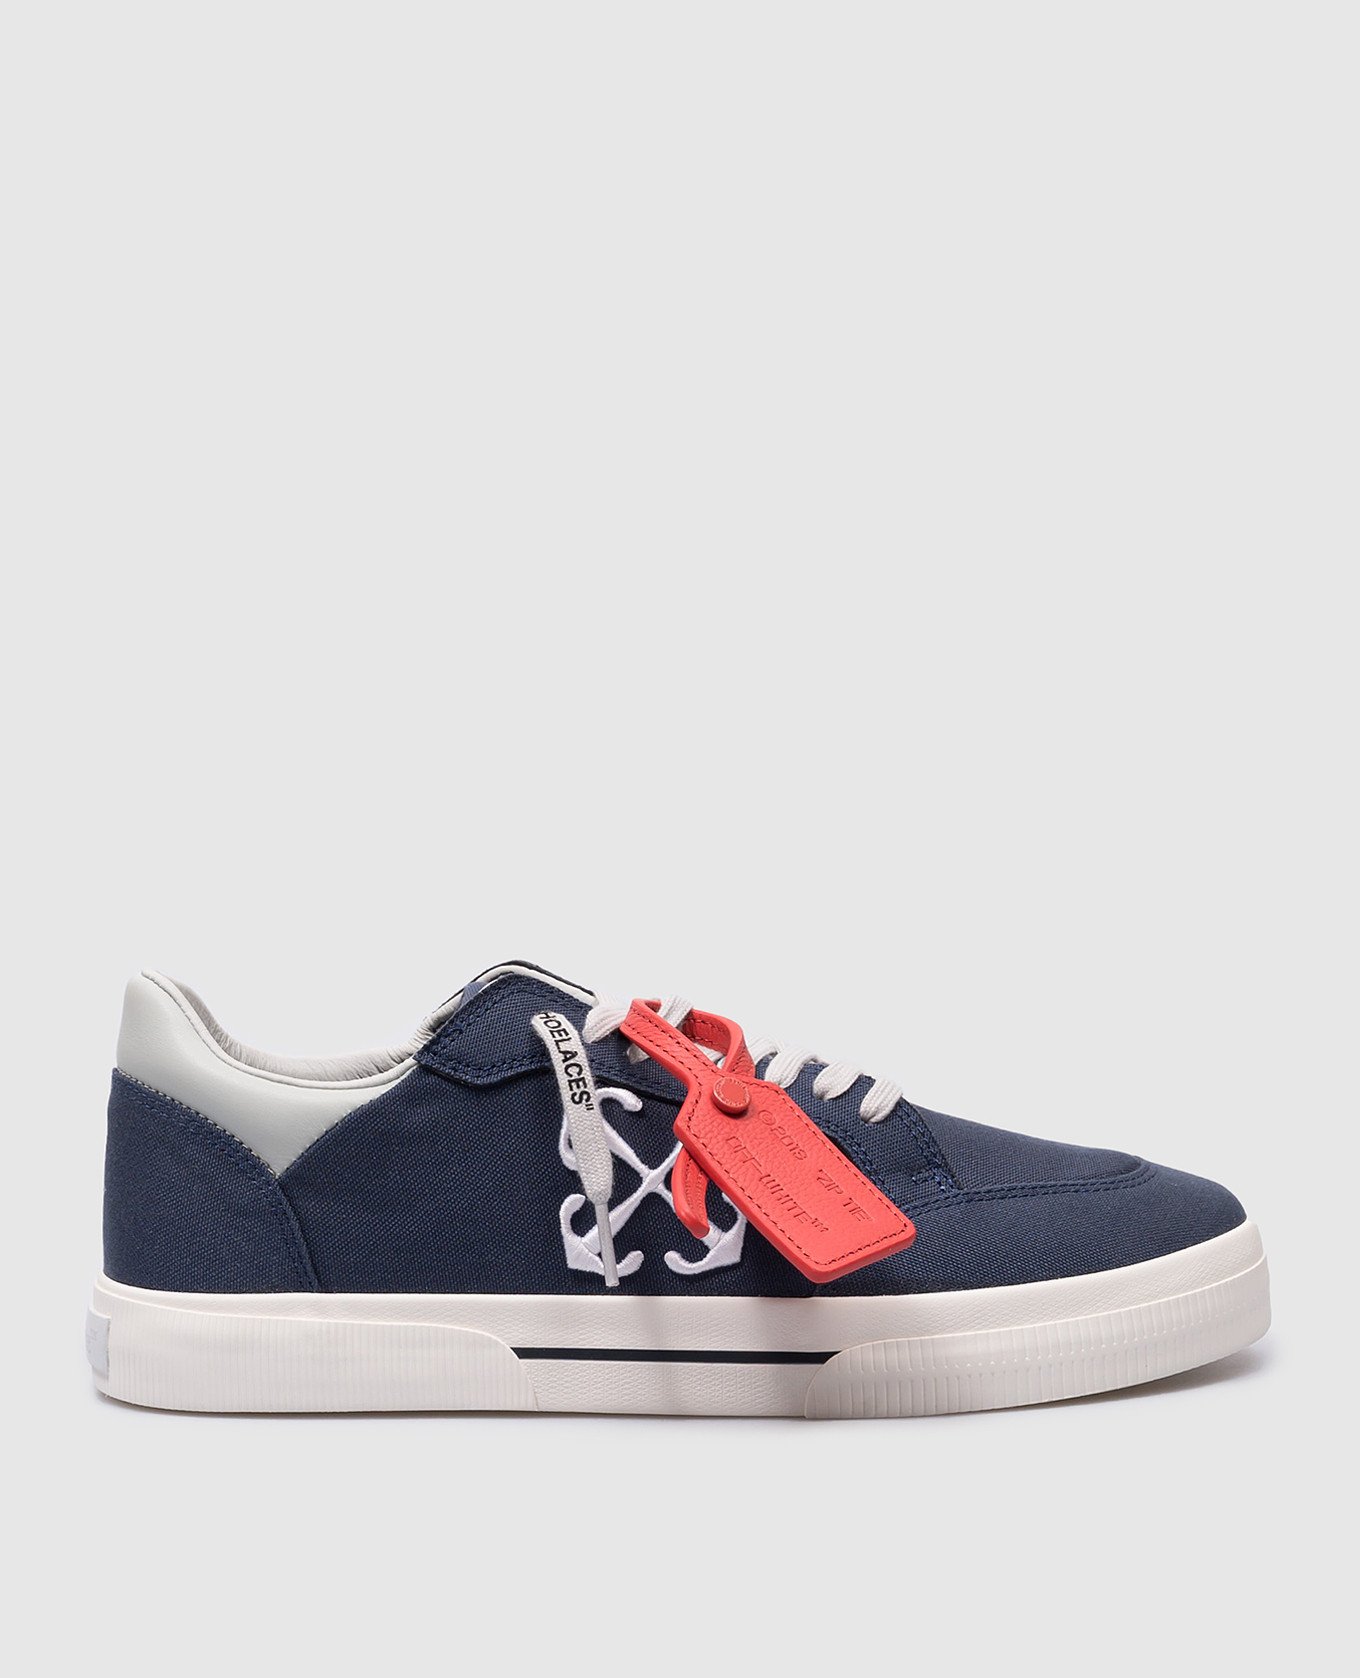 Blue sneakers with Arrow logo embroidery